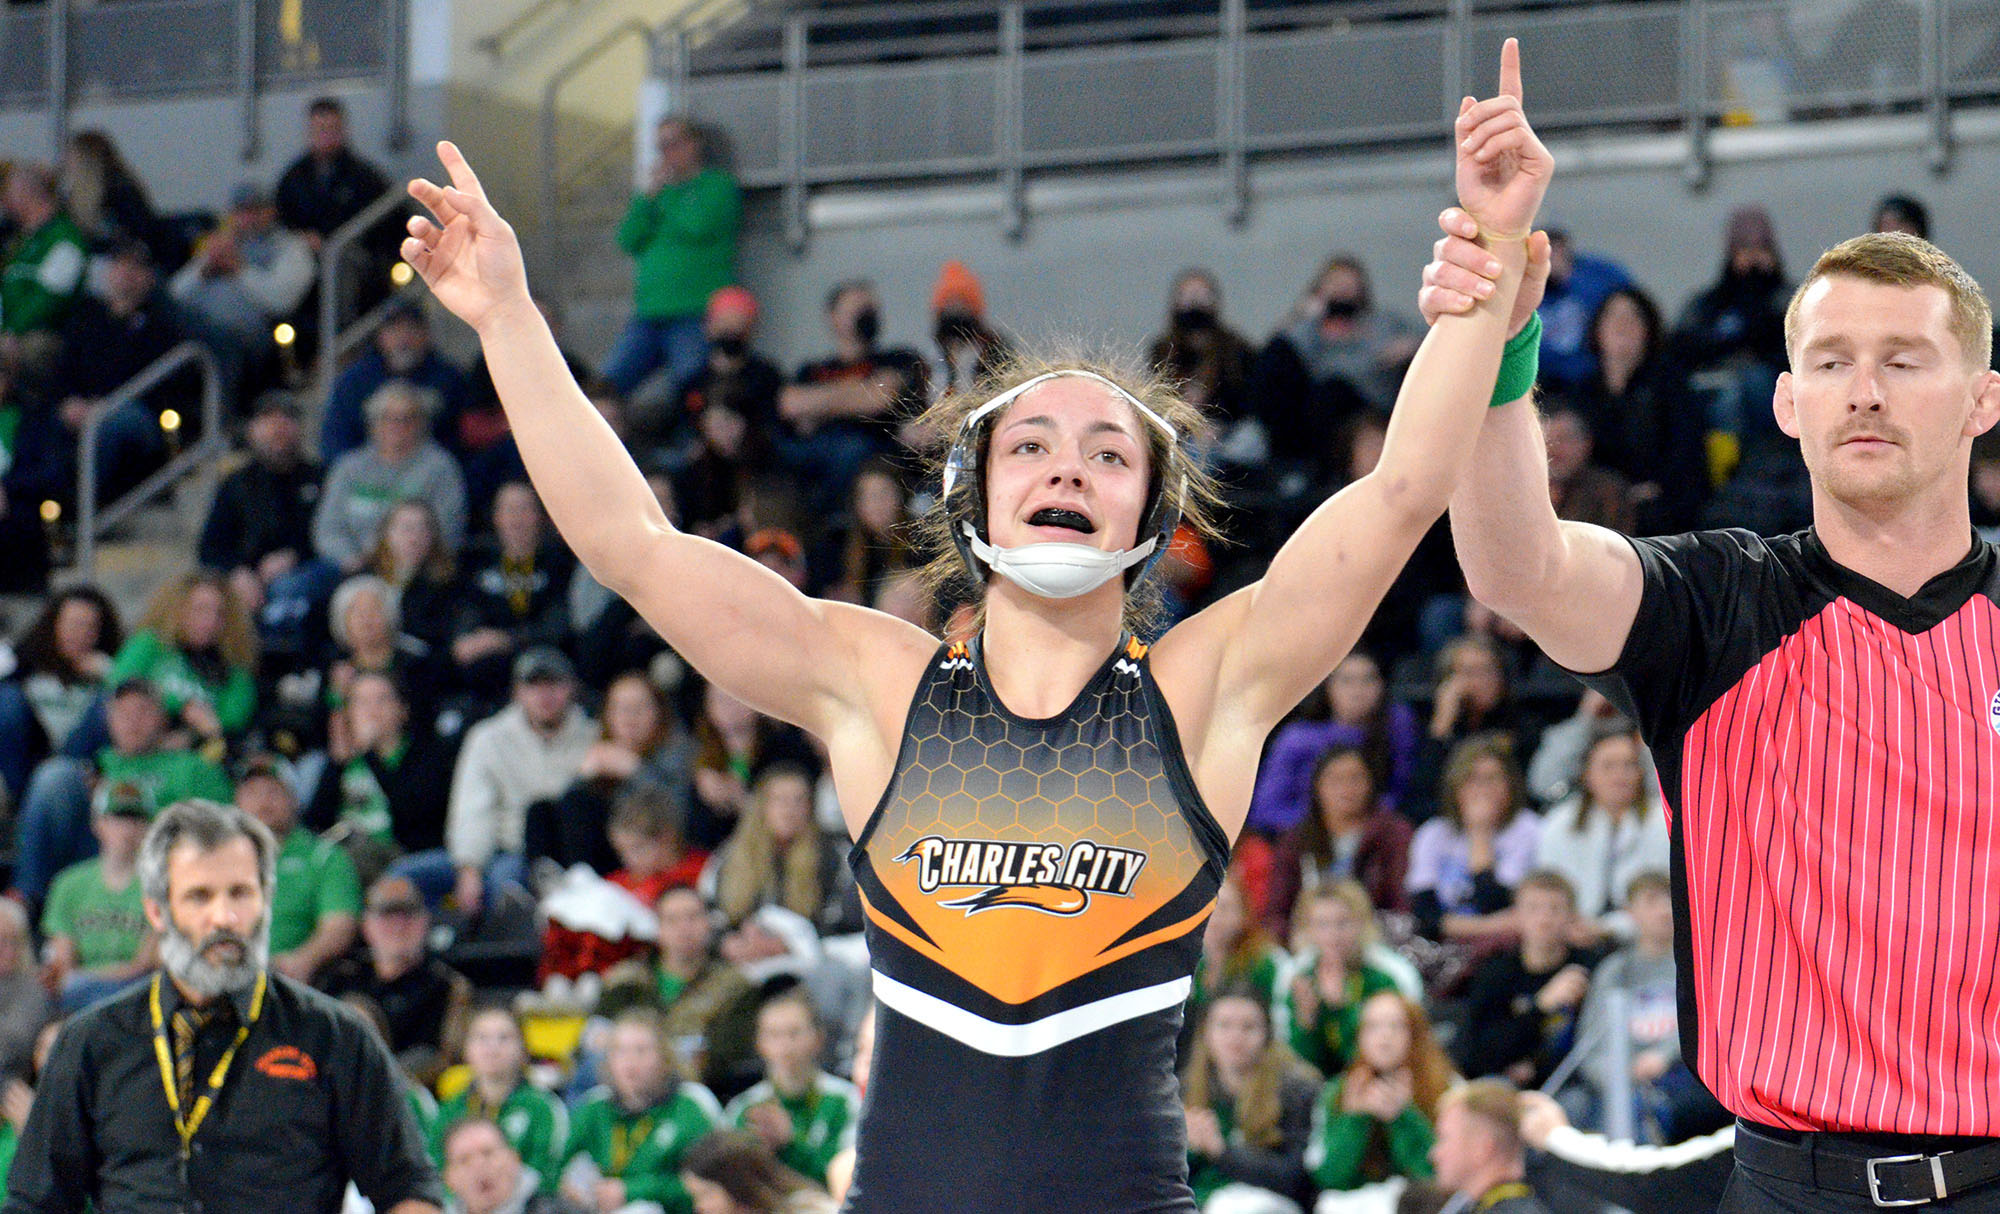 Lilly Luft wins 2nd state wrestling title